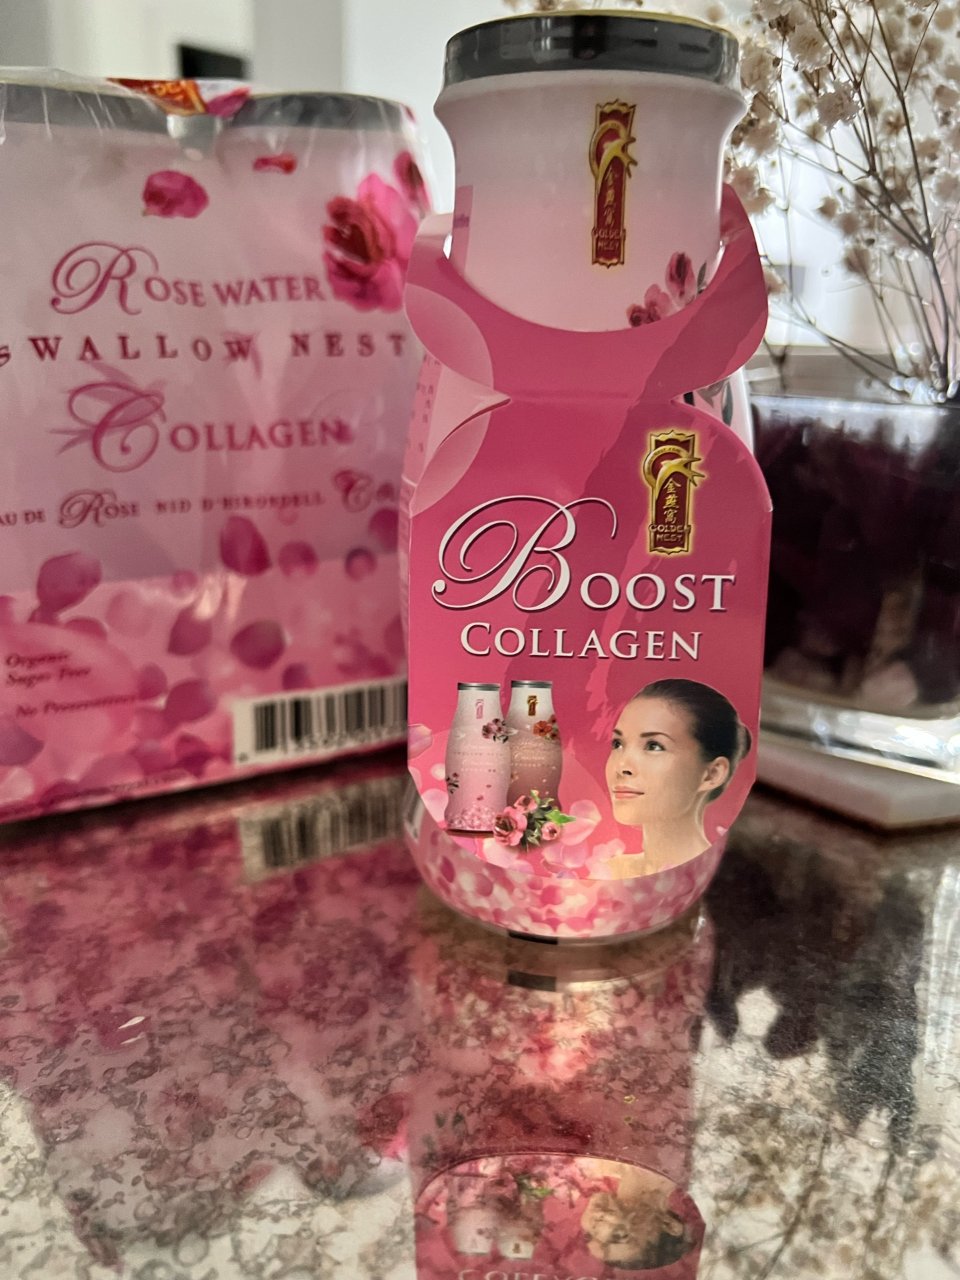 Premium Swallow Bird's Nest Collagen Drink with Rosewater - 4 or 12 Bo